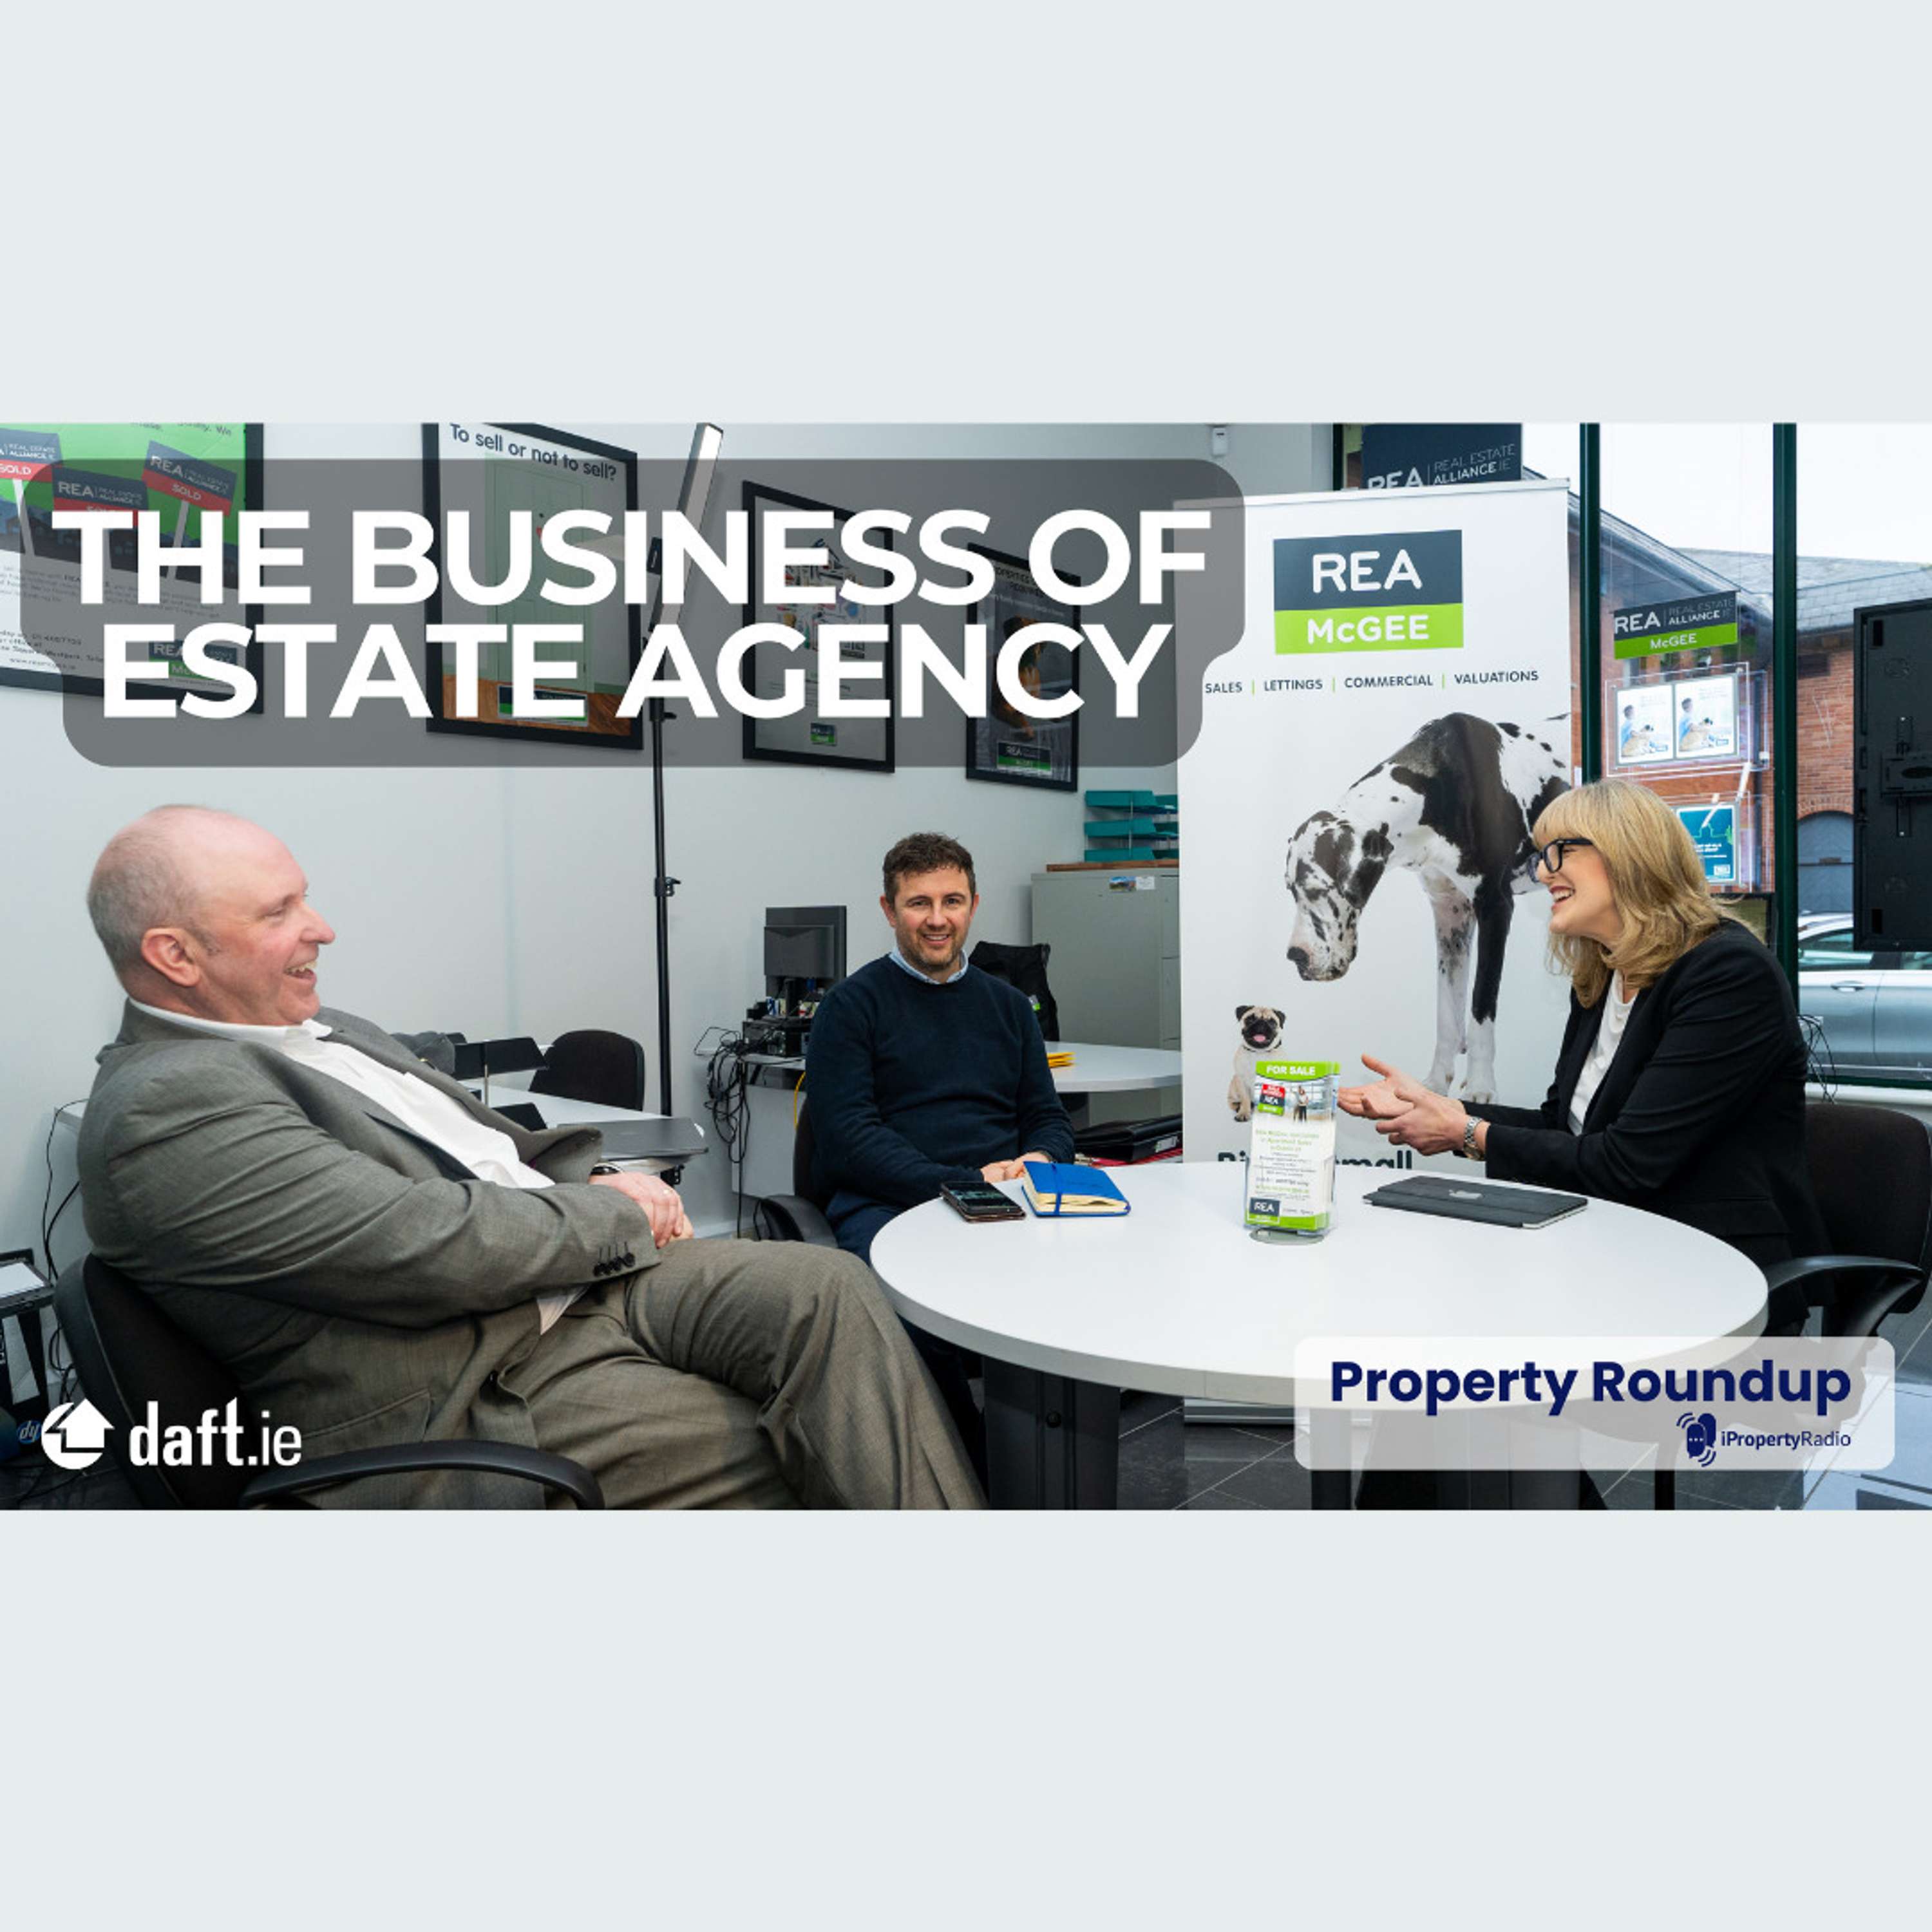 The Business of Estate Agency